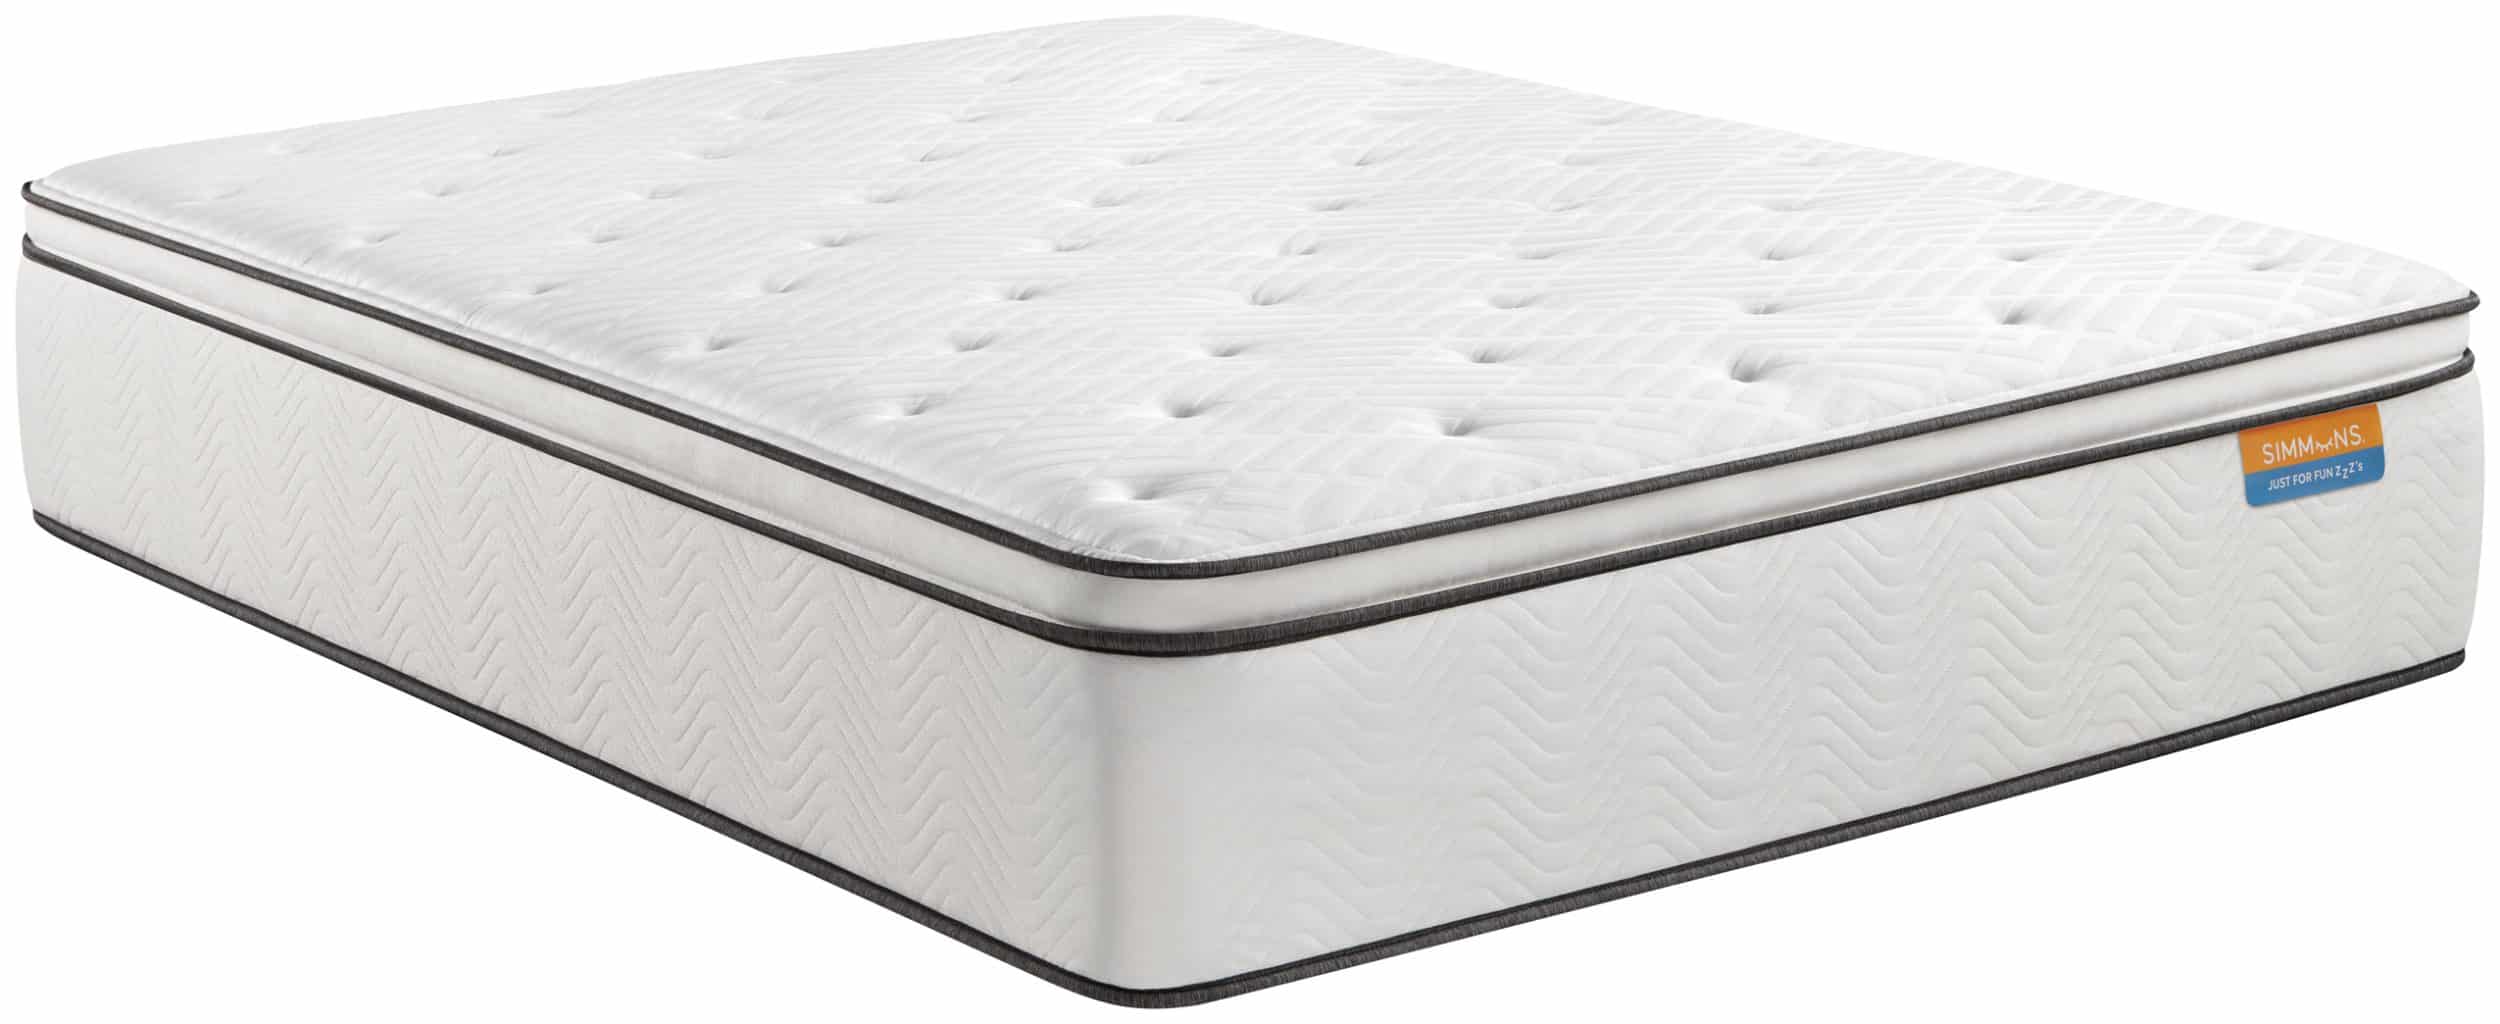 Side view of all white Simmons mattress